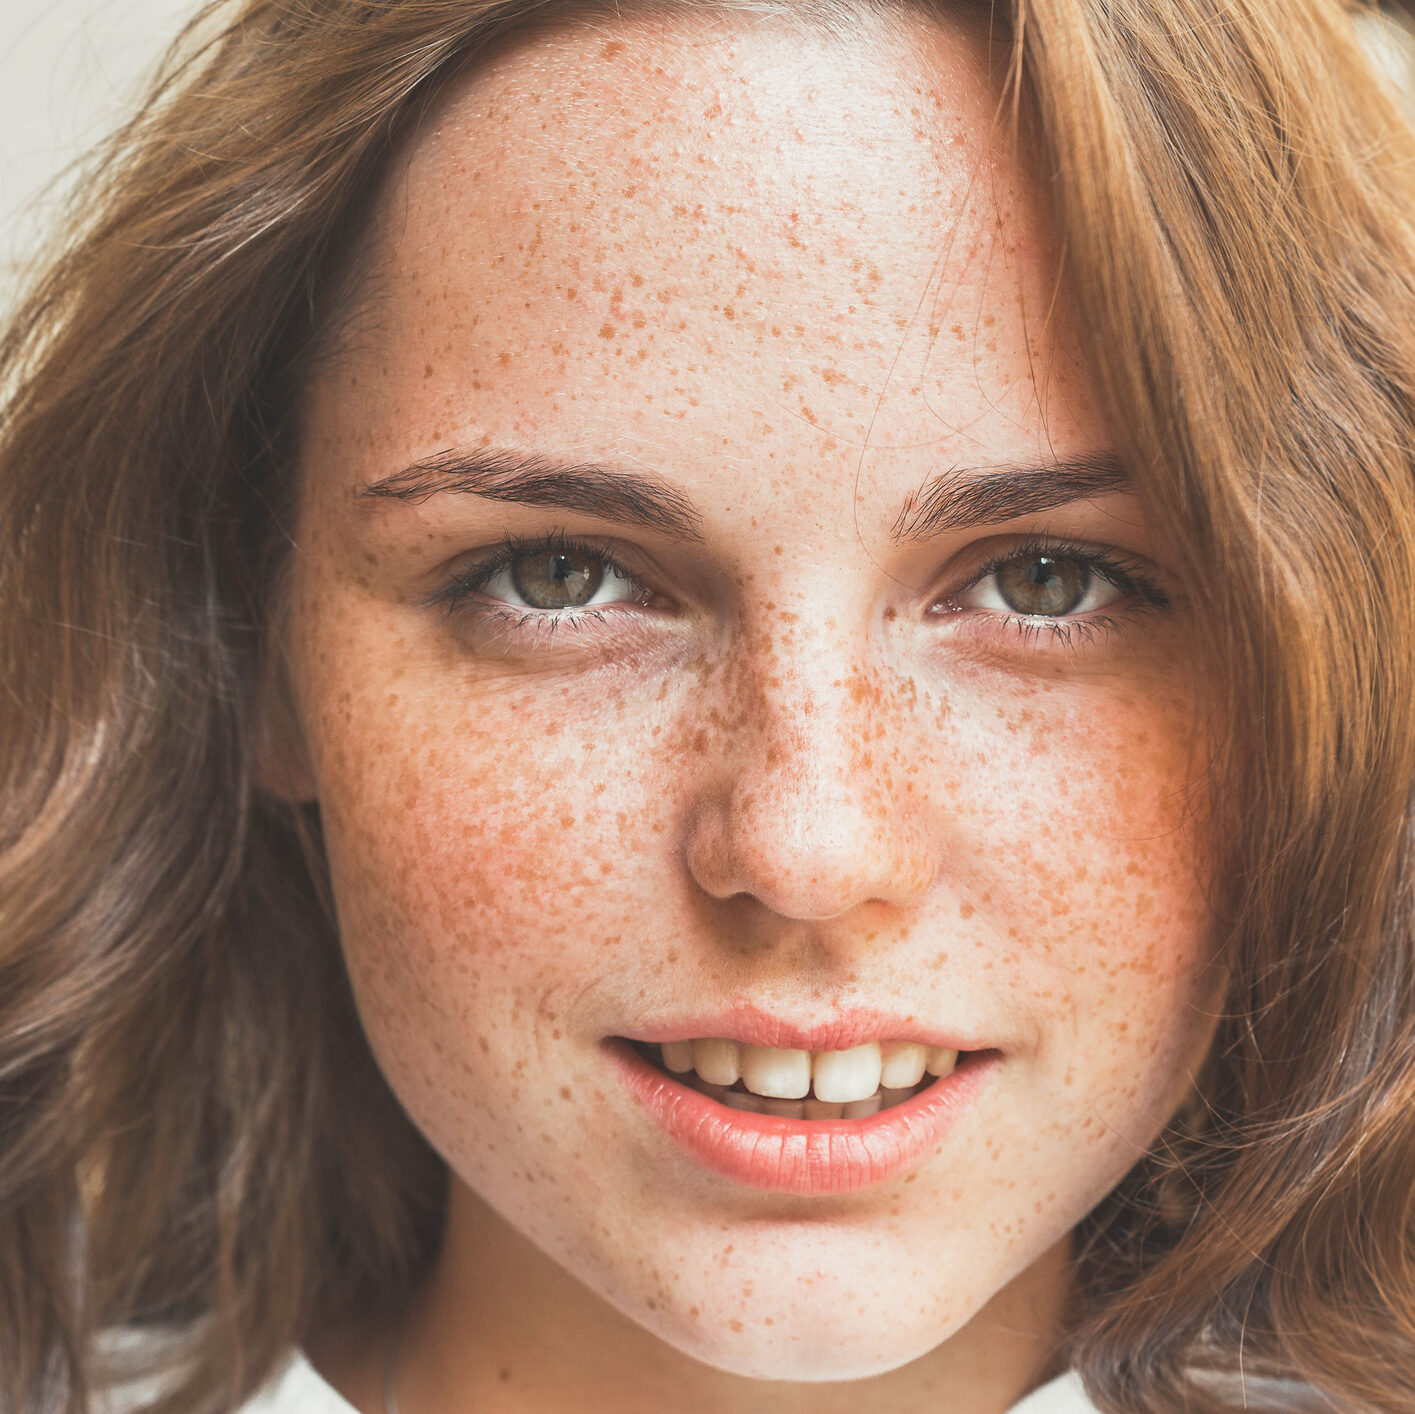 Woman with freckles